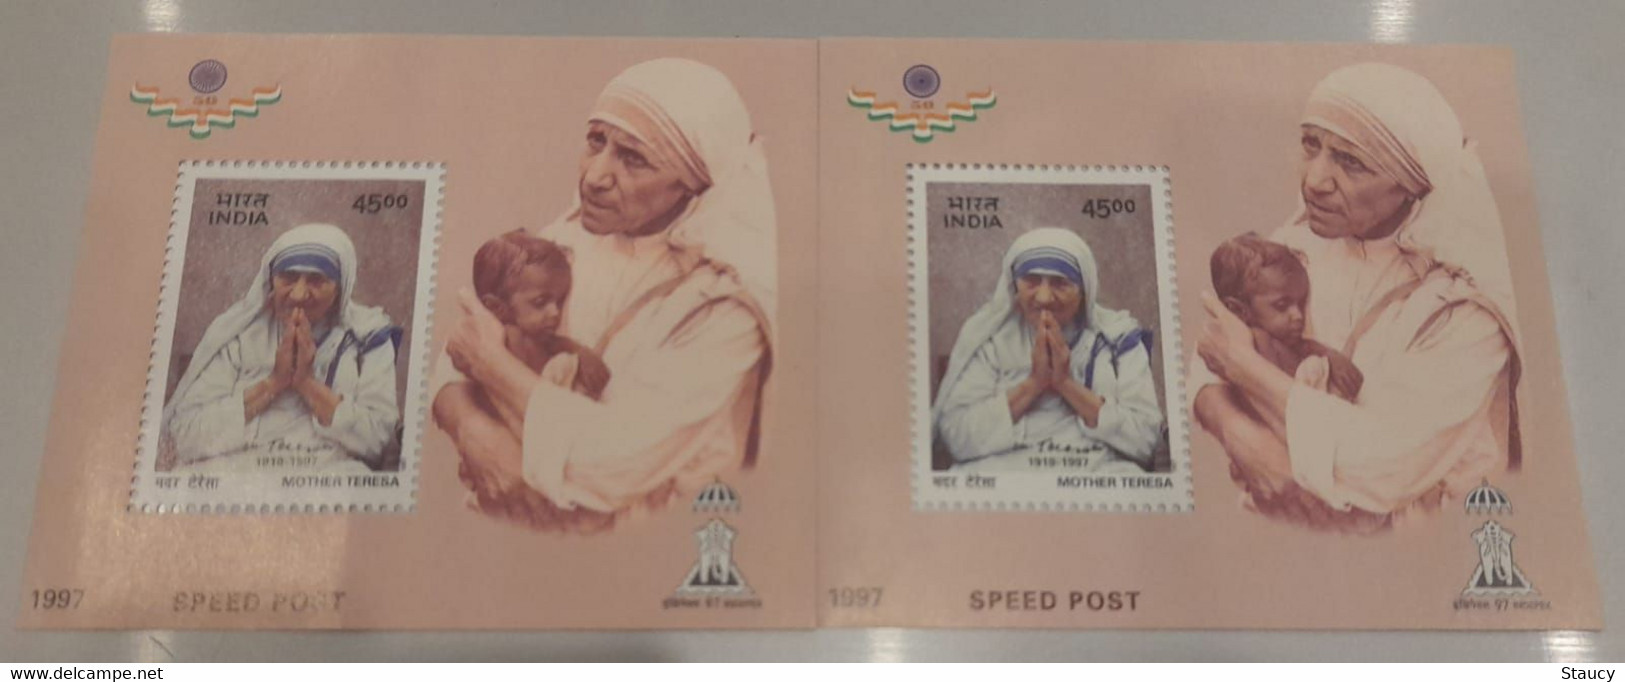 India 1997 Error Mother Teresa Speed ​​Post 2 Miniature Sheets Right One Is "DRY PRINT" MS MNH - Mère Teresa